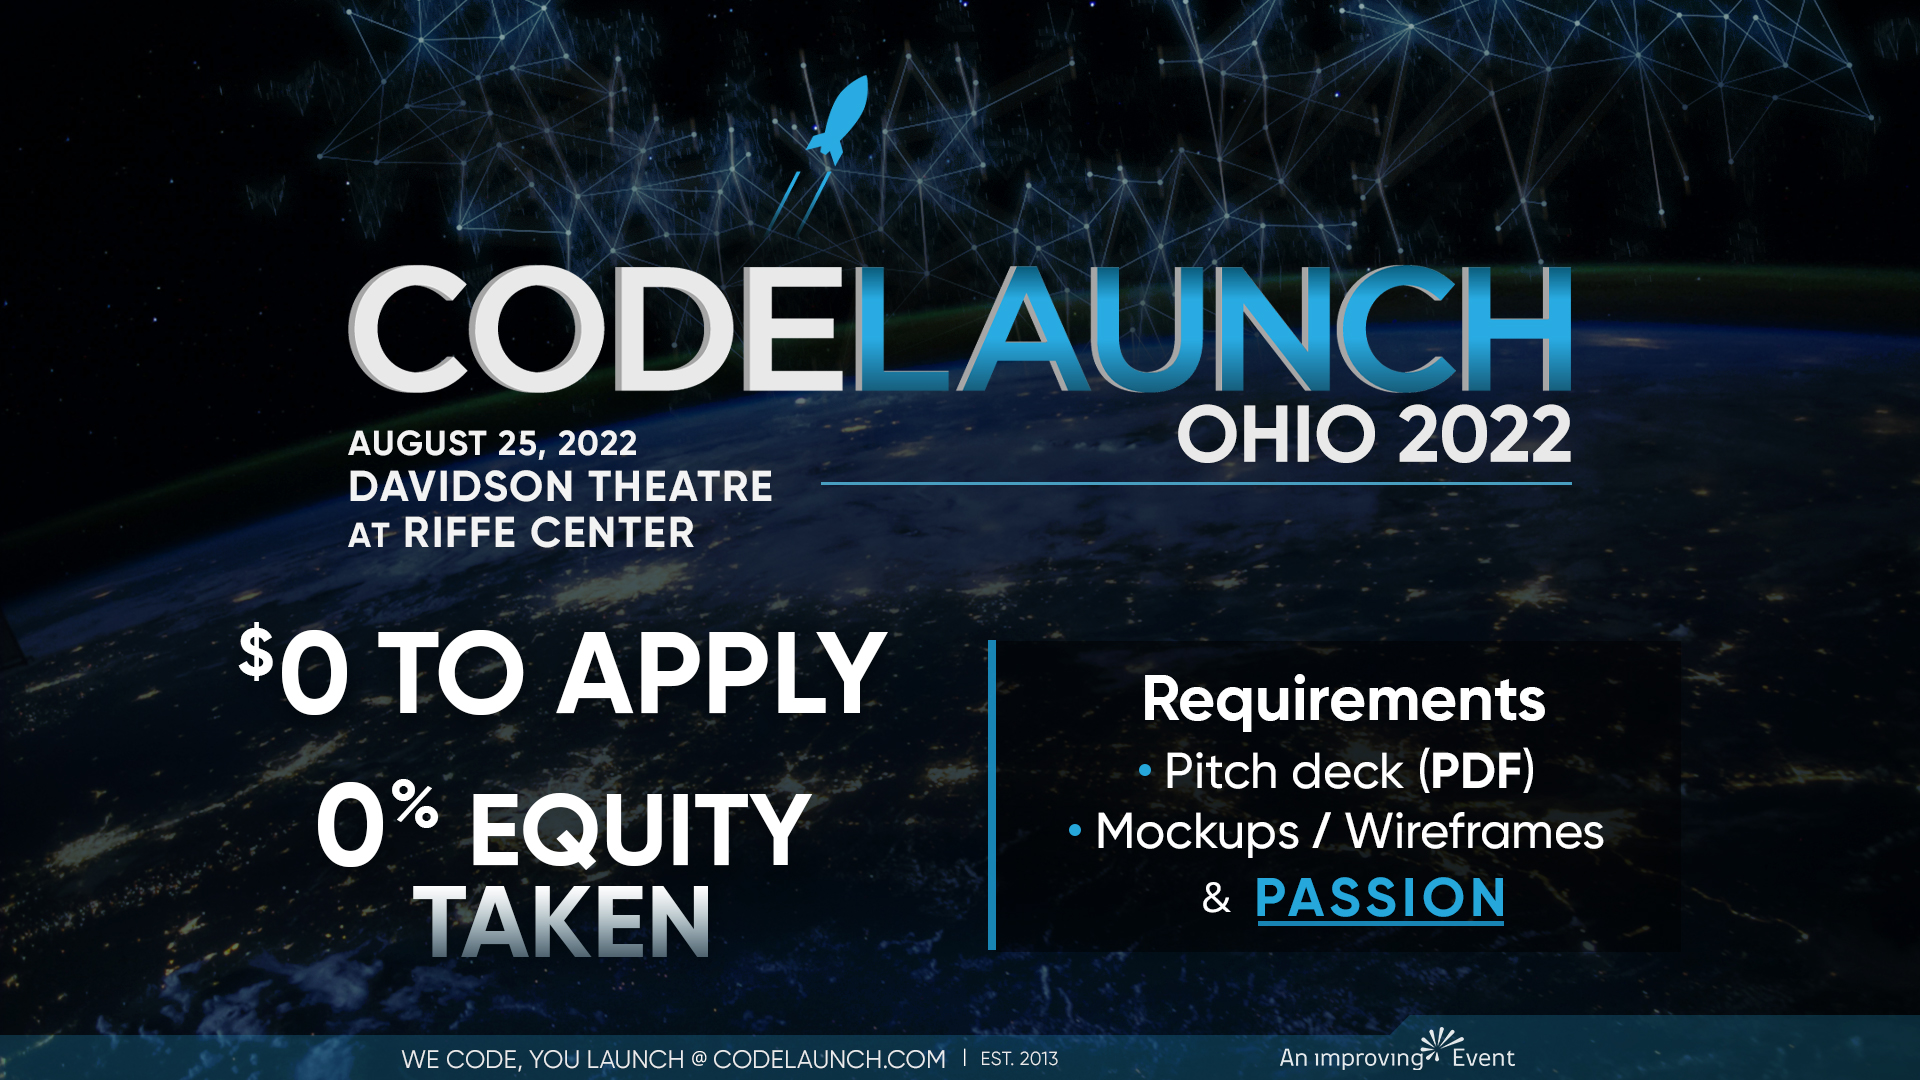 Now’s Your Chance to Apply for CodeLaunch Ohio 2022